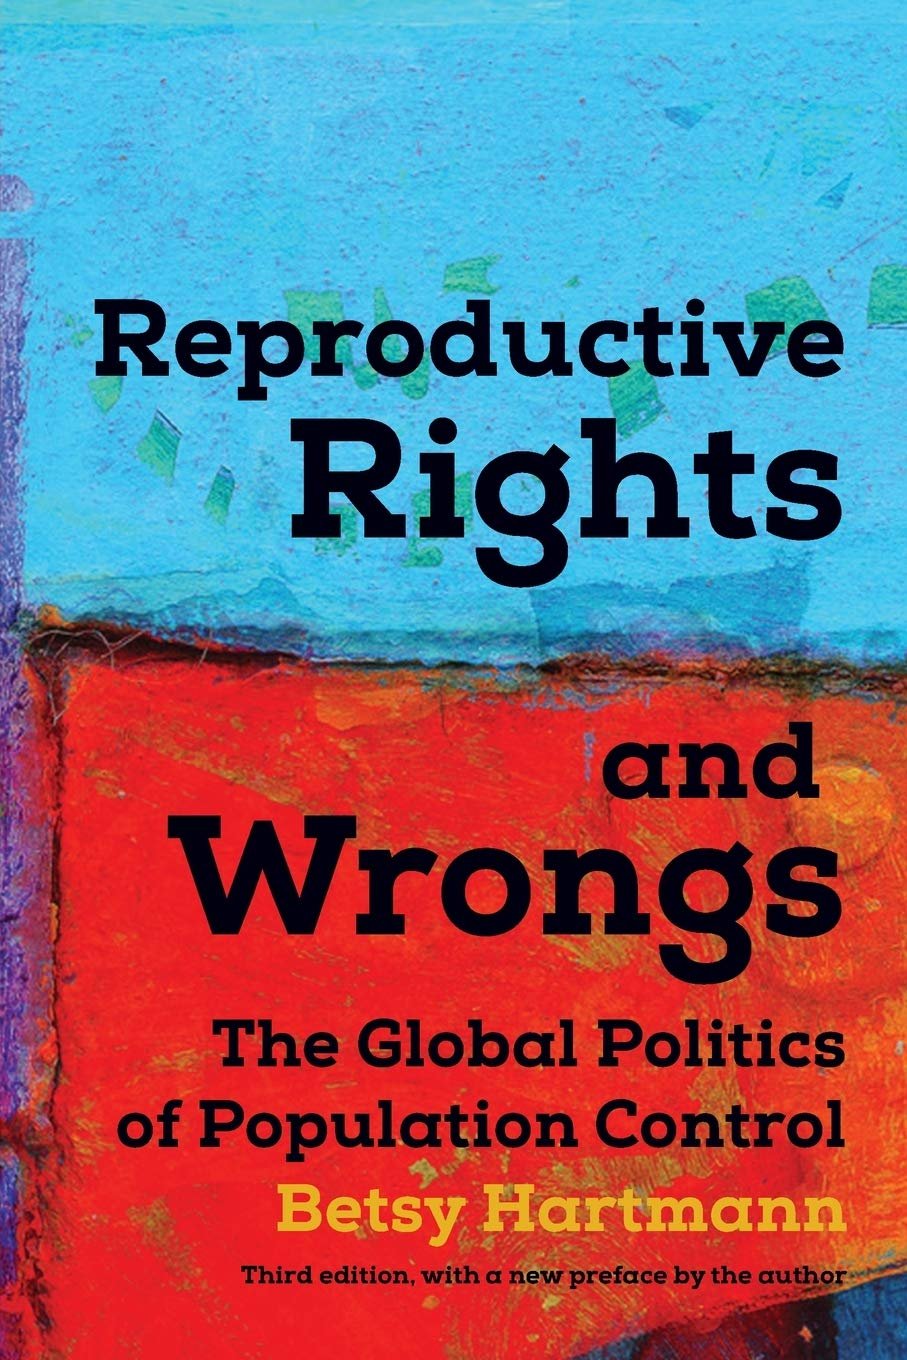 Reproductive Rights and Wrongs (Betsy Hartmann, 2016)